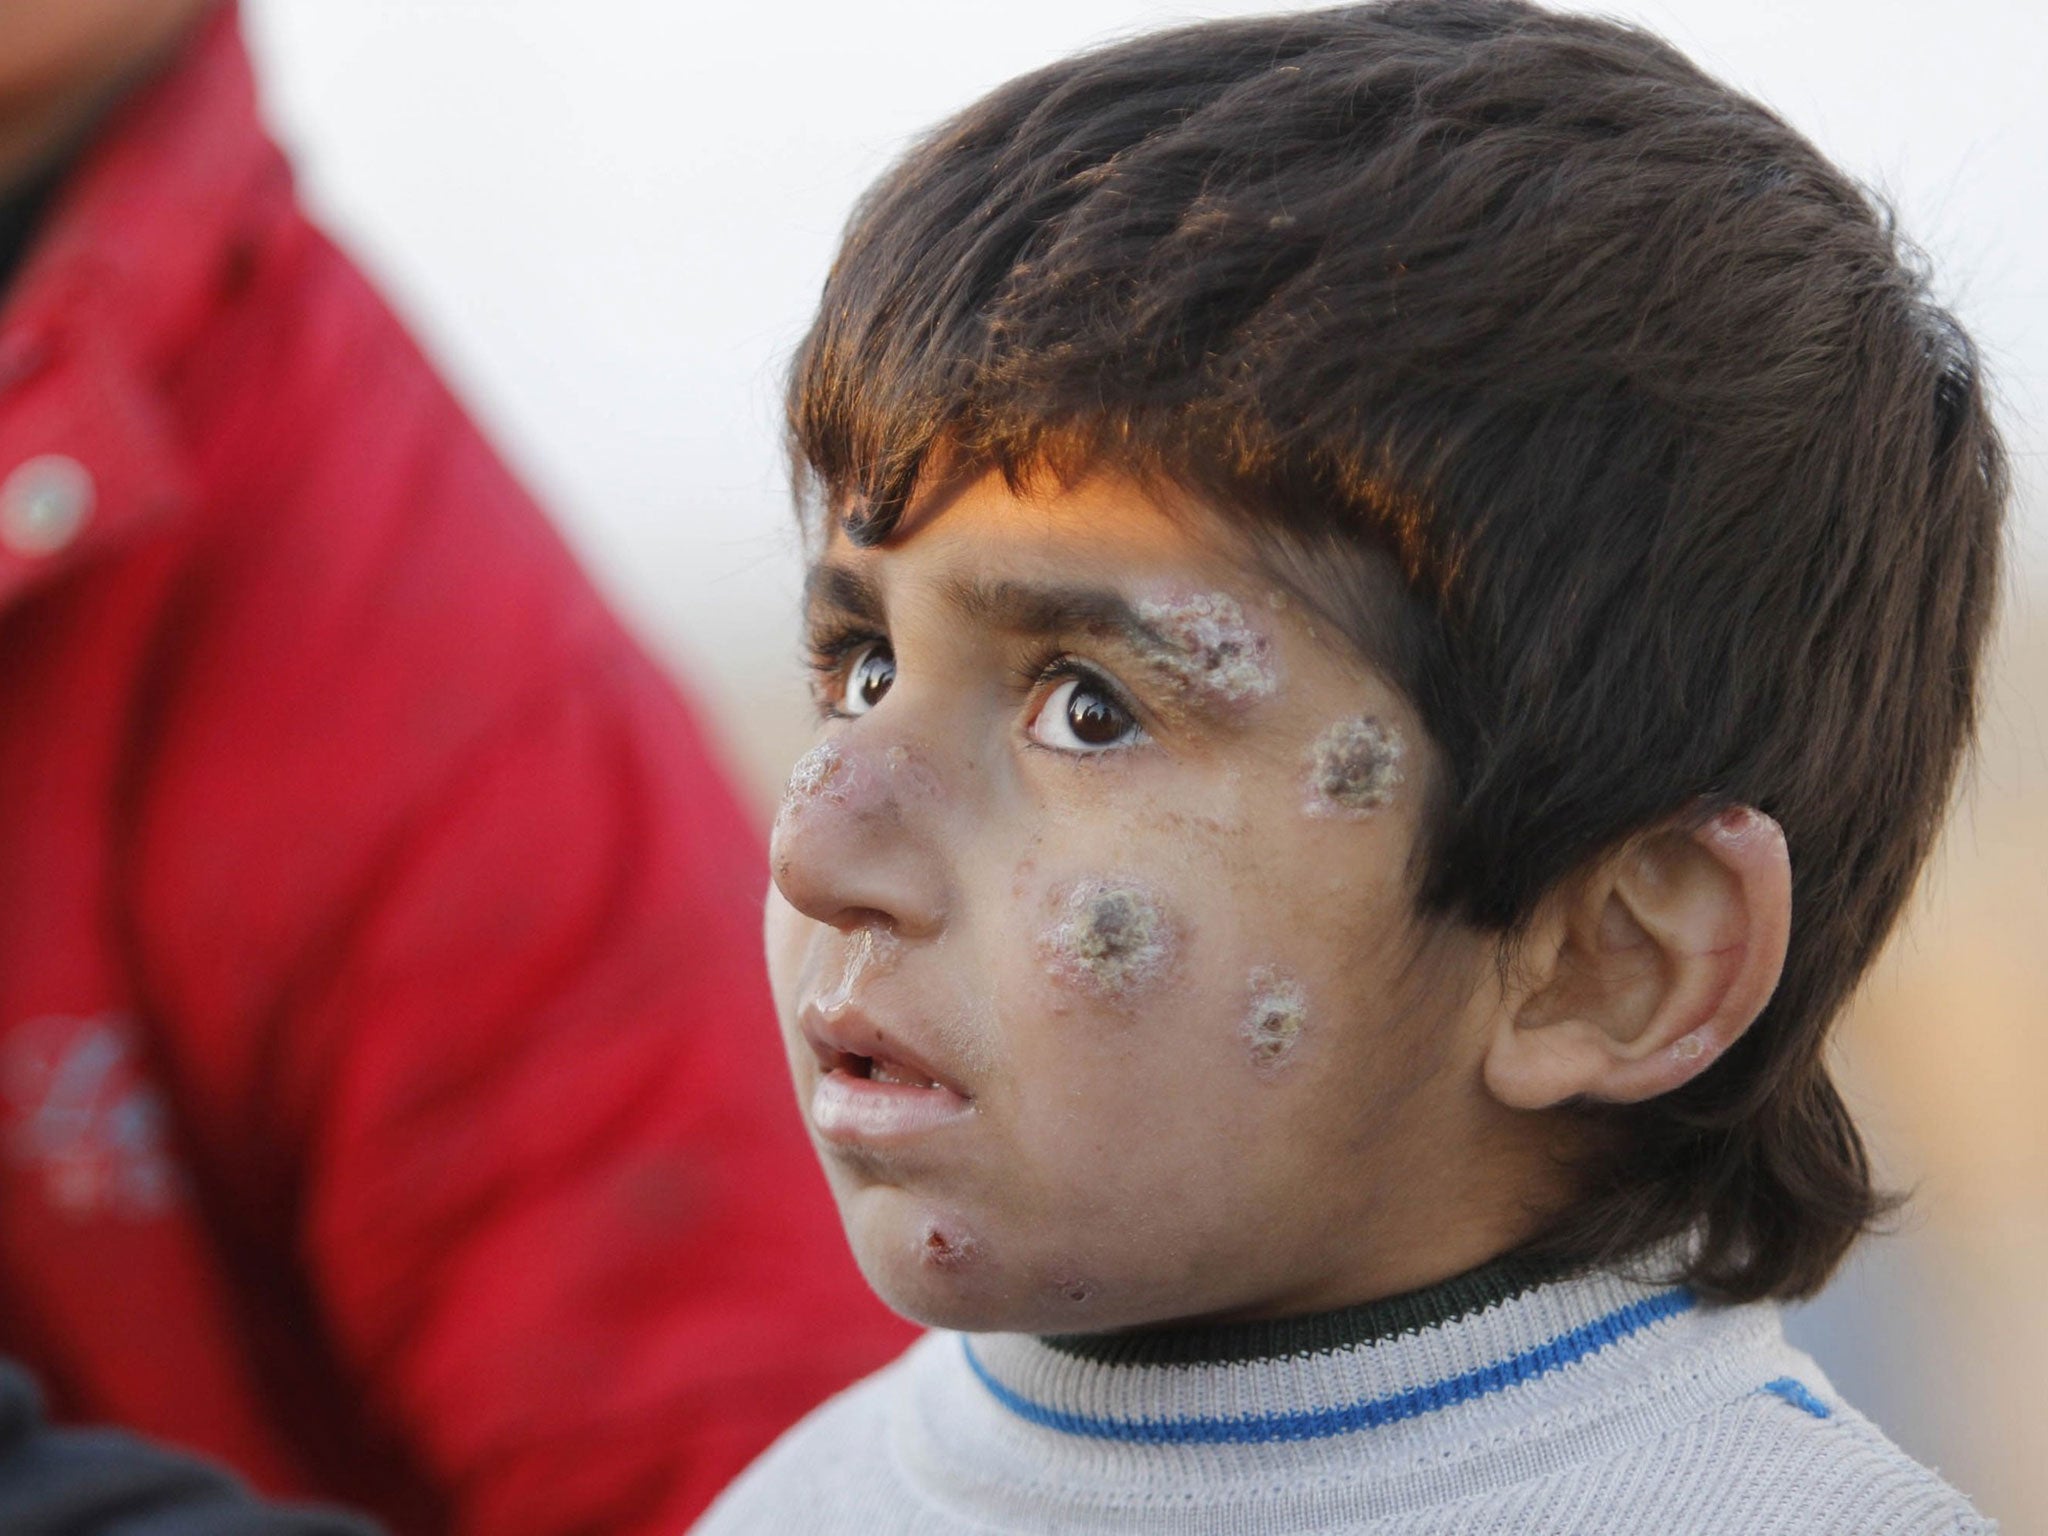 A boy from the minority Yazidi sect looks on in the outskirts of Kirkuk, January 17, 2015 (Reuters)